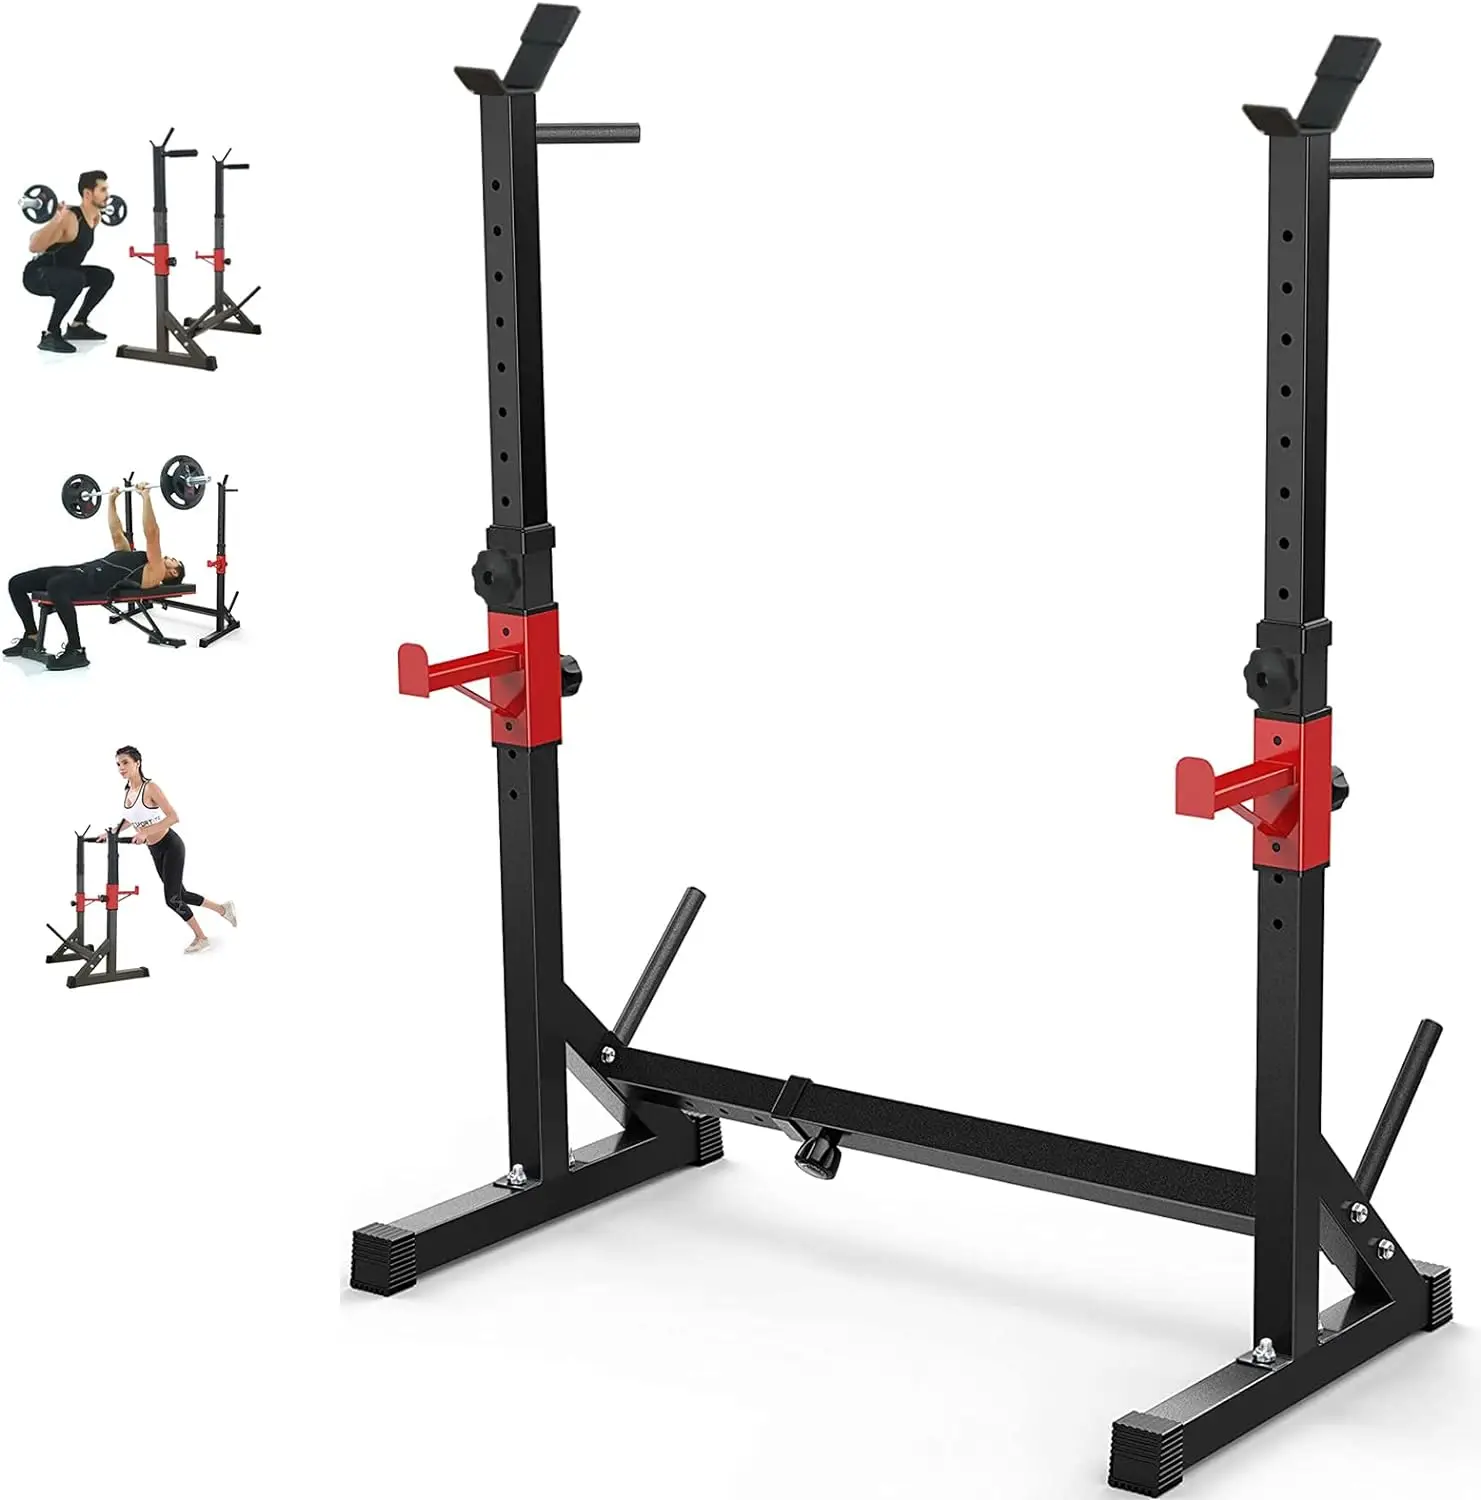 

Adjustable Squat Rack Stand with Barbell Rack Weight Plate Holder, J Hooks,Dip Bar Station for bench Press Strength Training Max